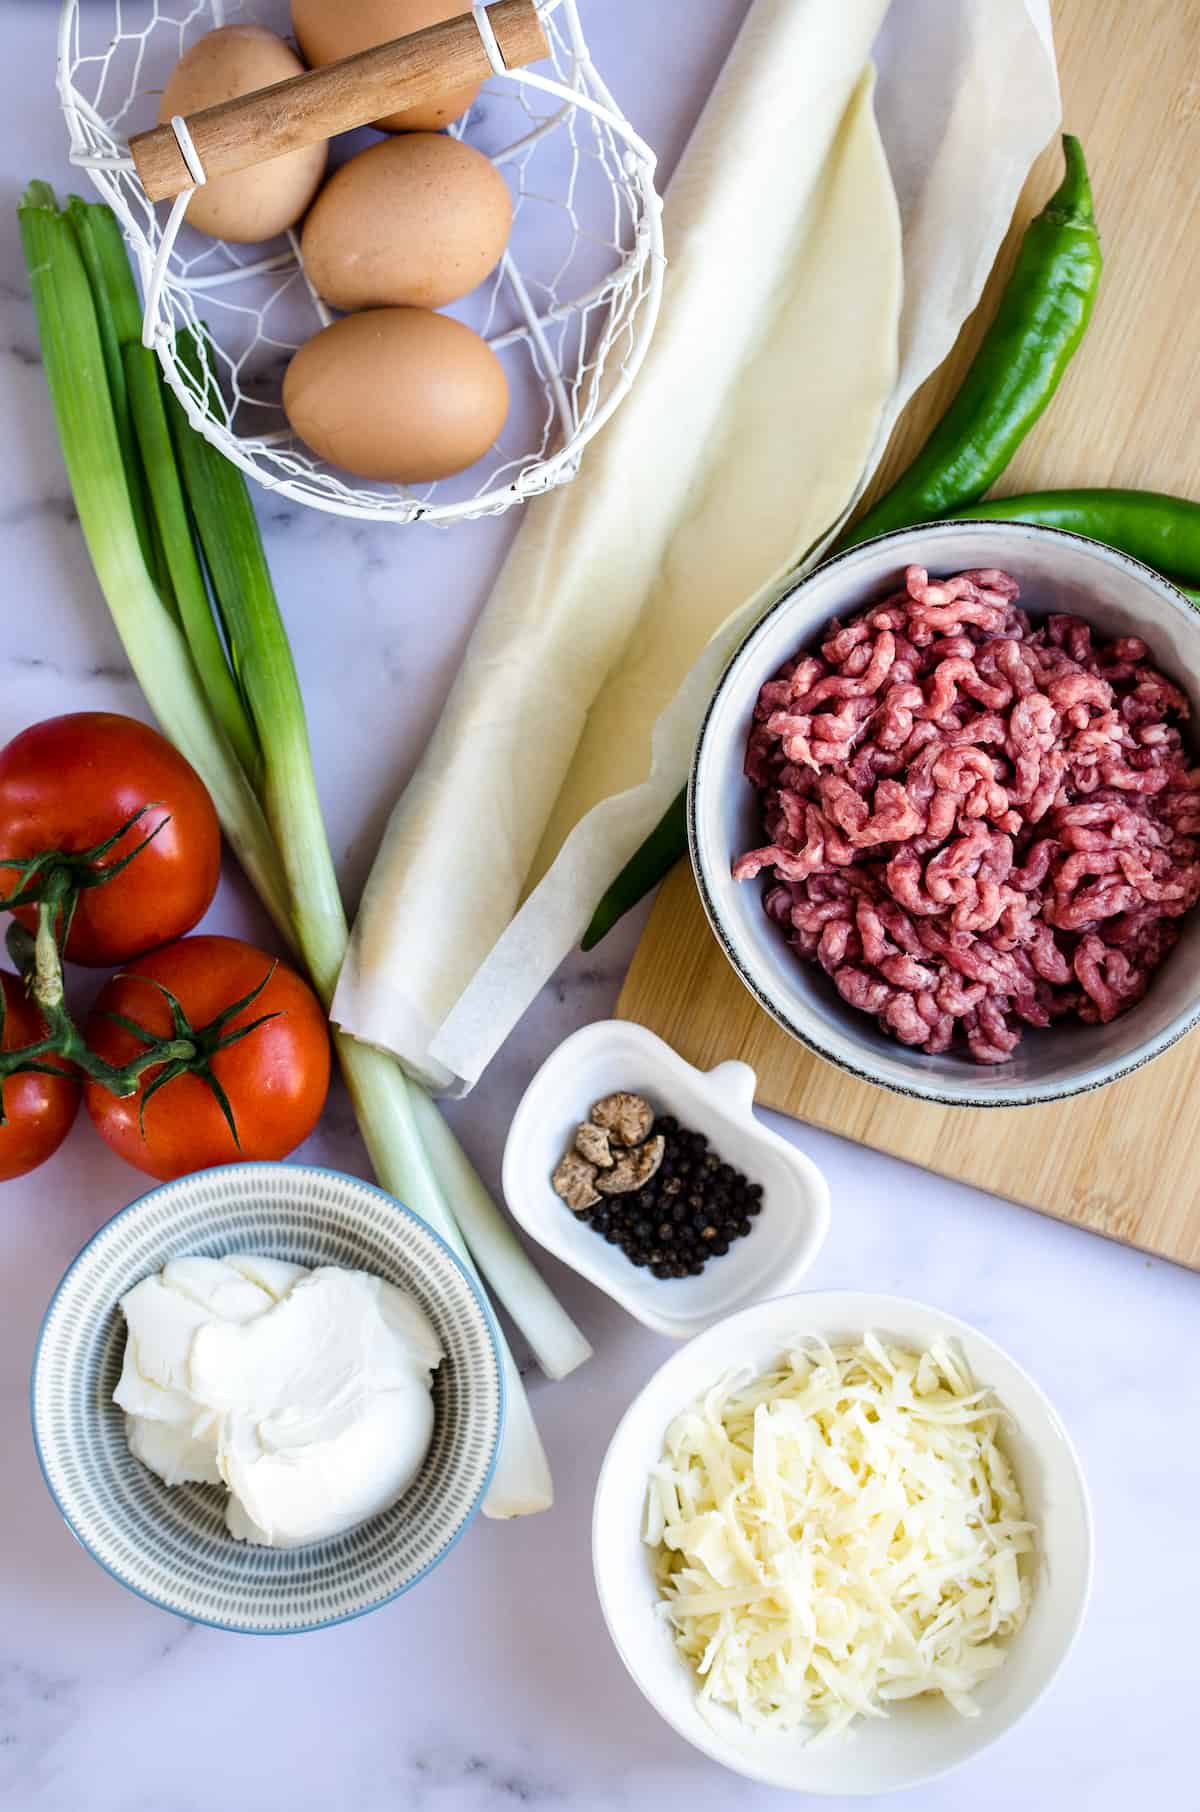 The ingredients for easy Tex-Mex Quiche: eggs, ground beef, tomatoes, green onions, whipped cream cheese, seasoning, green chilies, and shredded cheese.